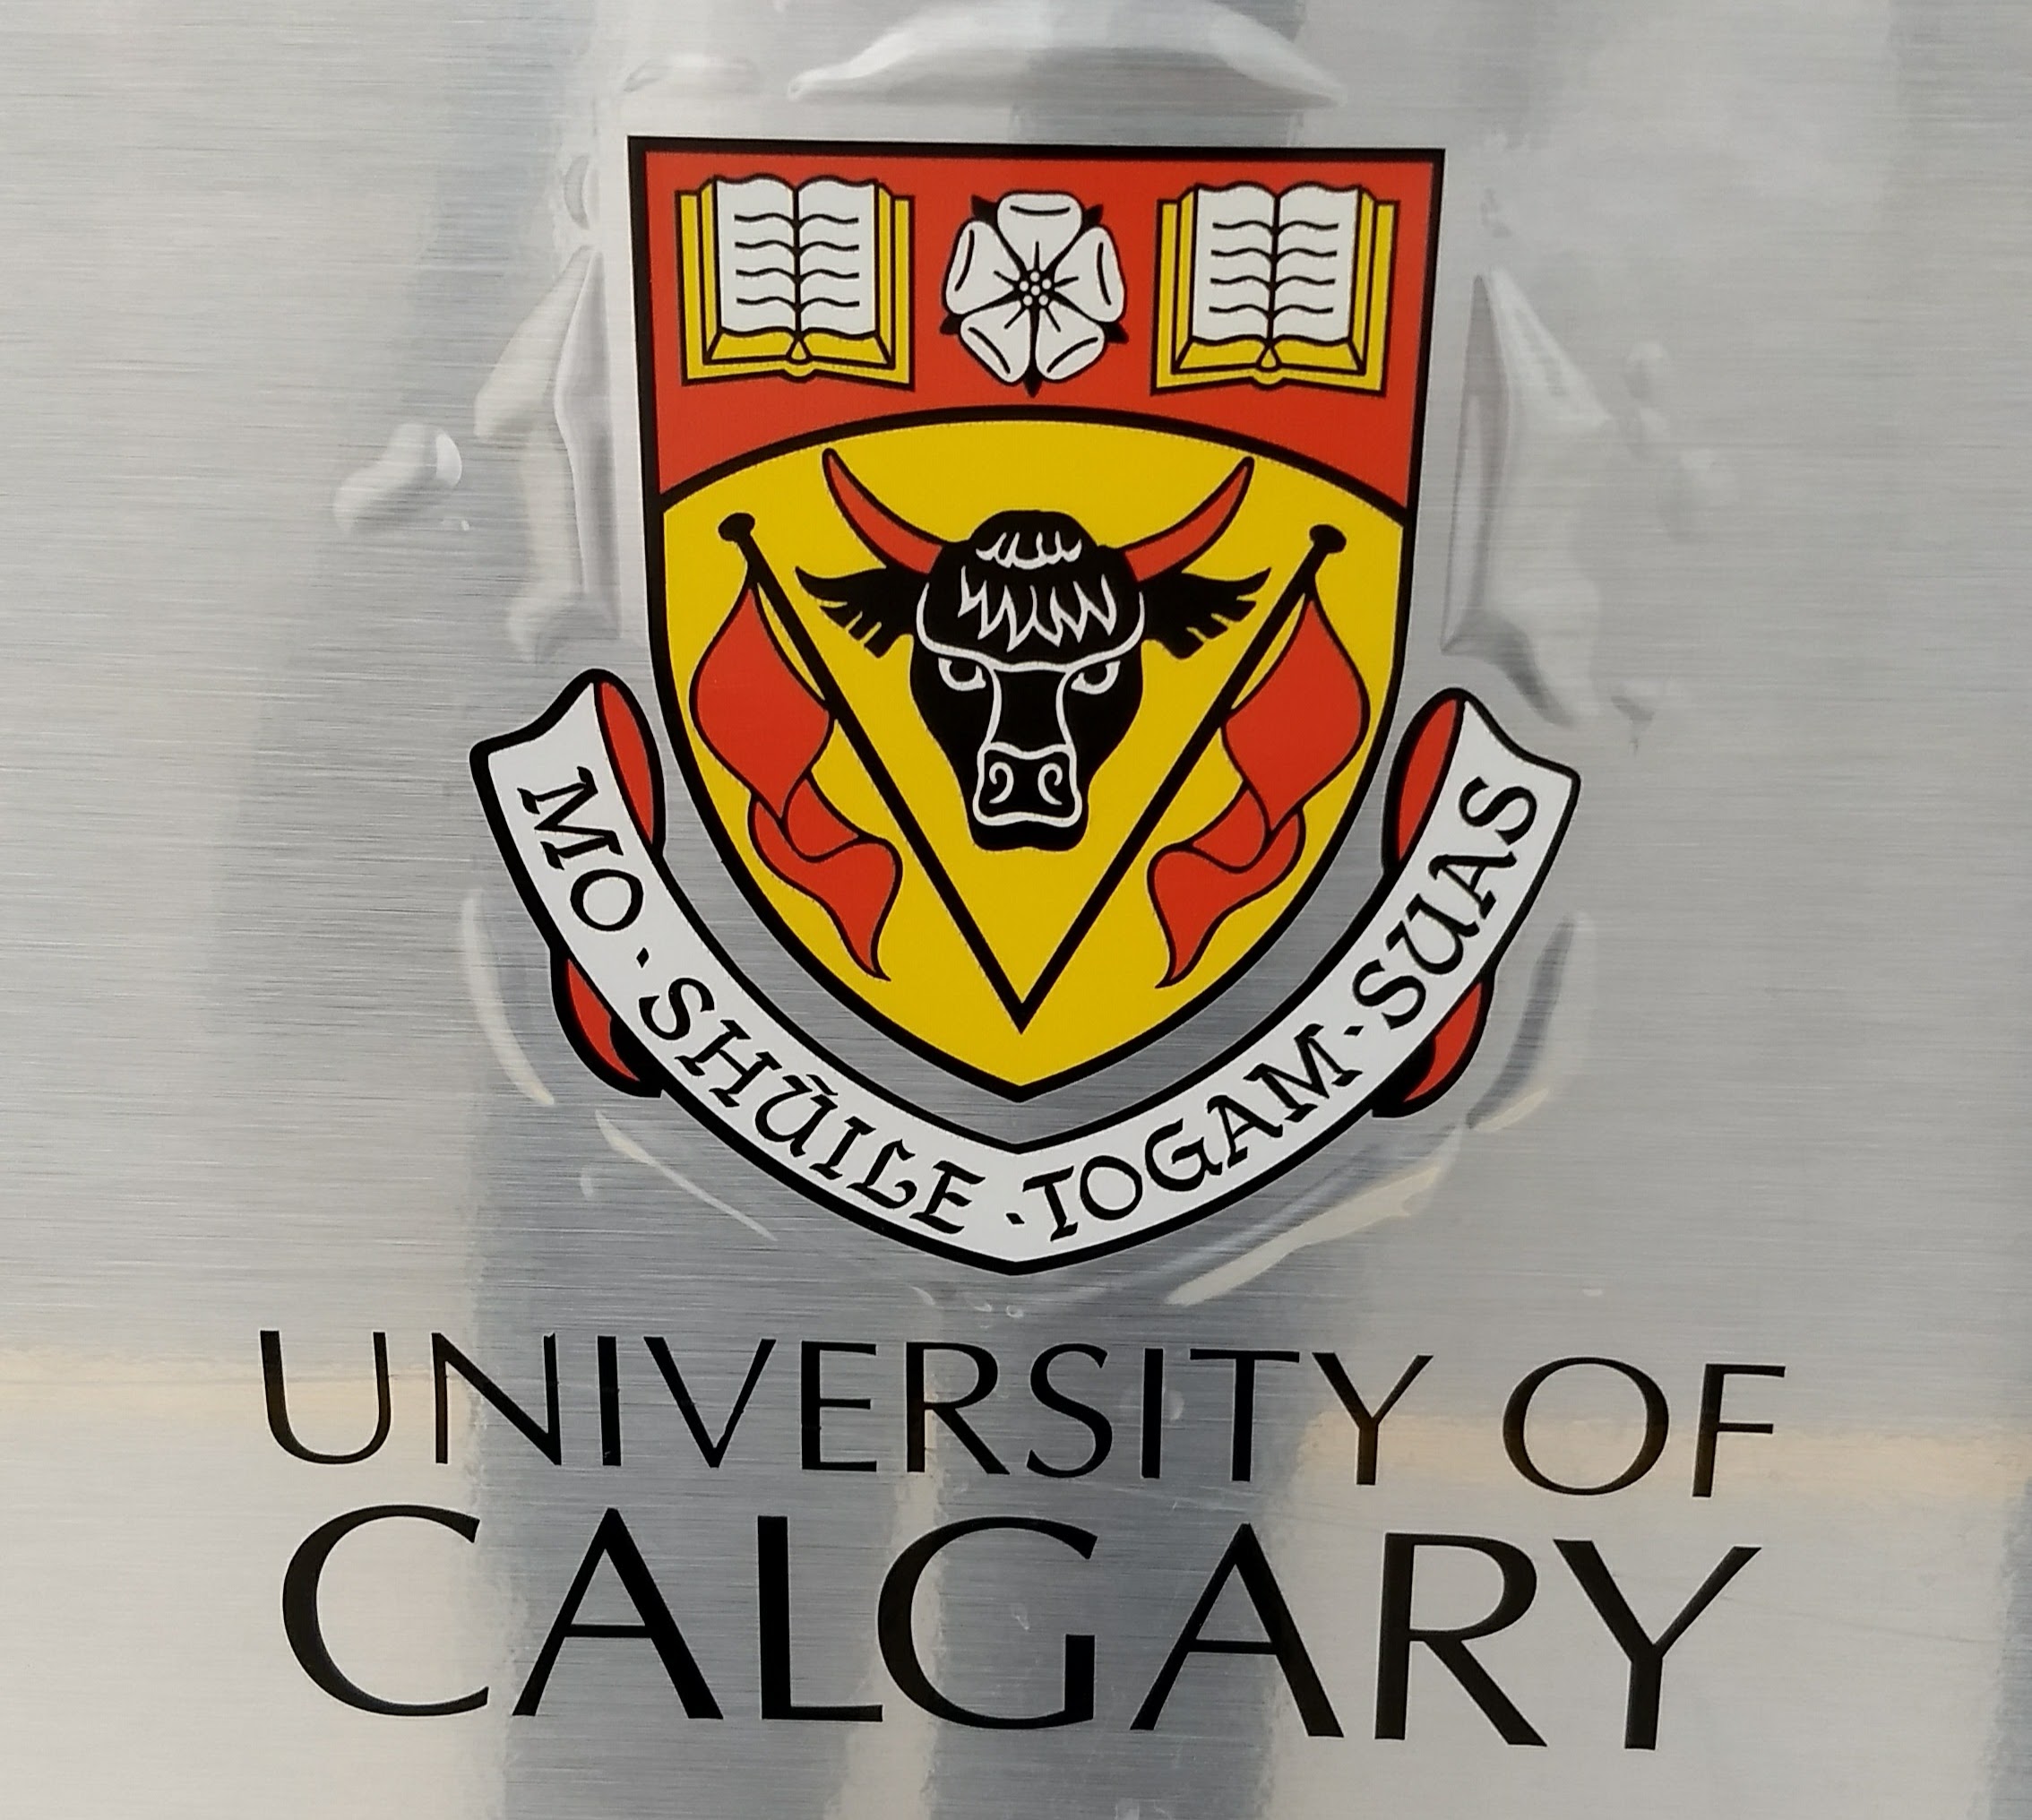 The arms of the University of Calgary, as were granted by Lyon